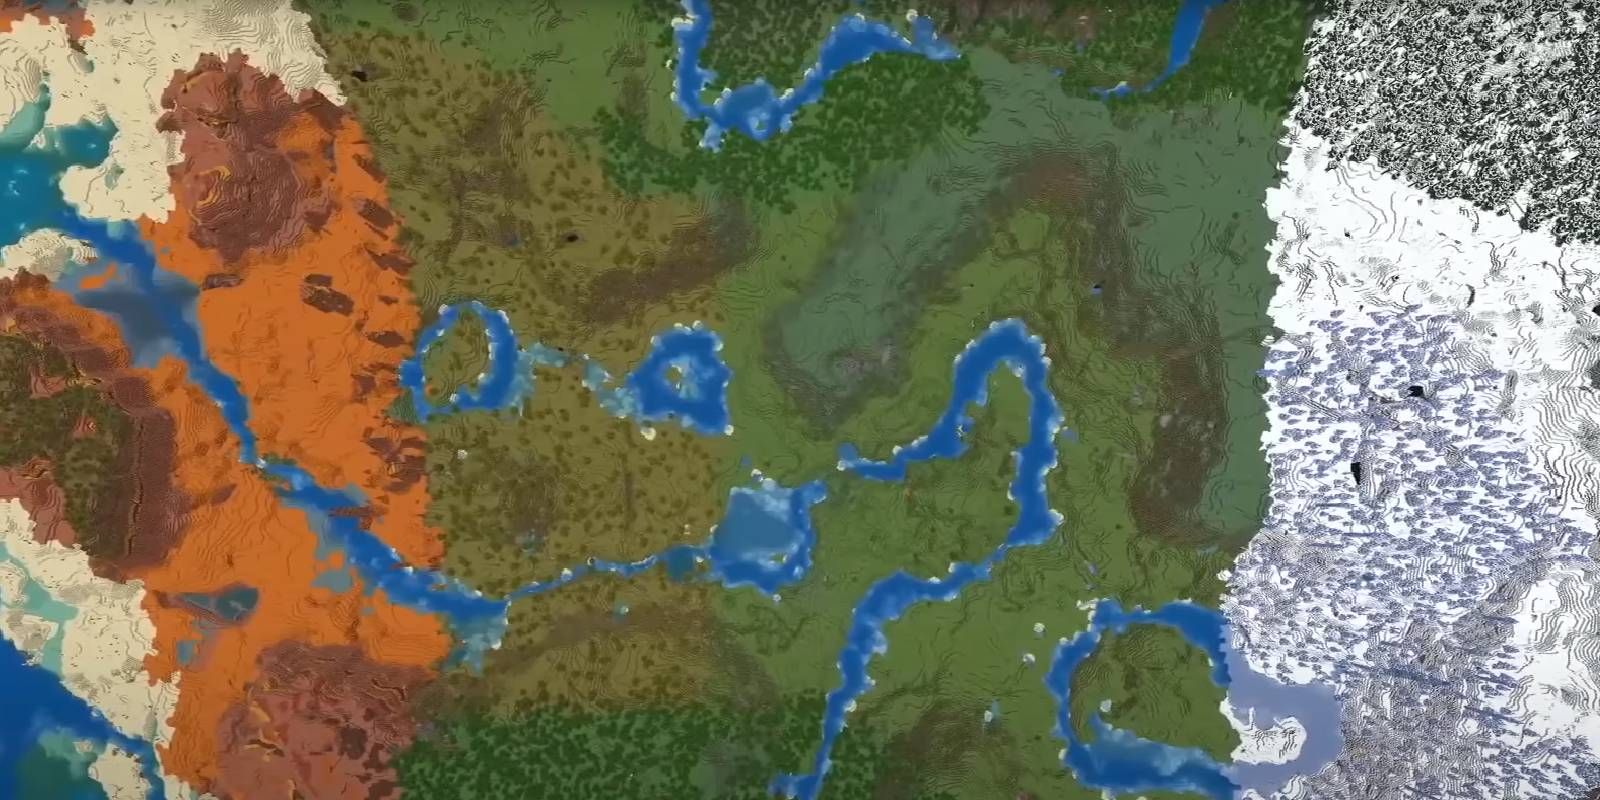 Minecraft Sand and Ice Biomes Next to Each Other From World Seed